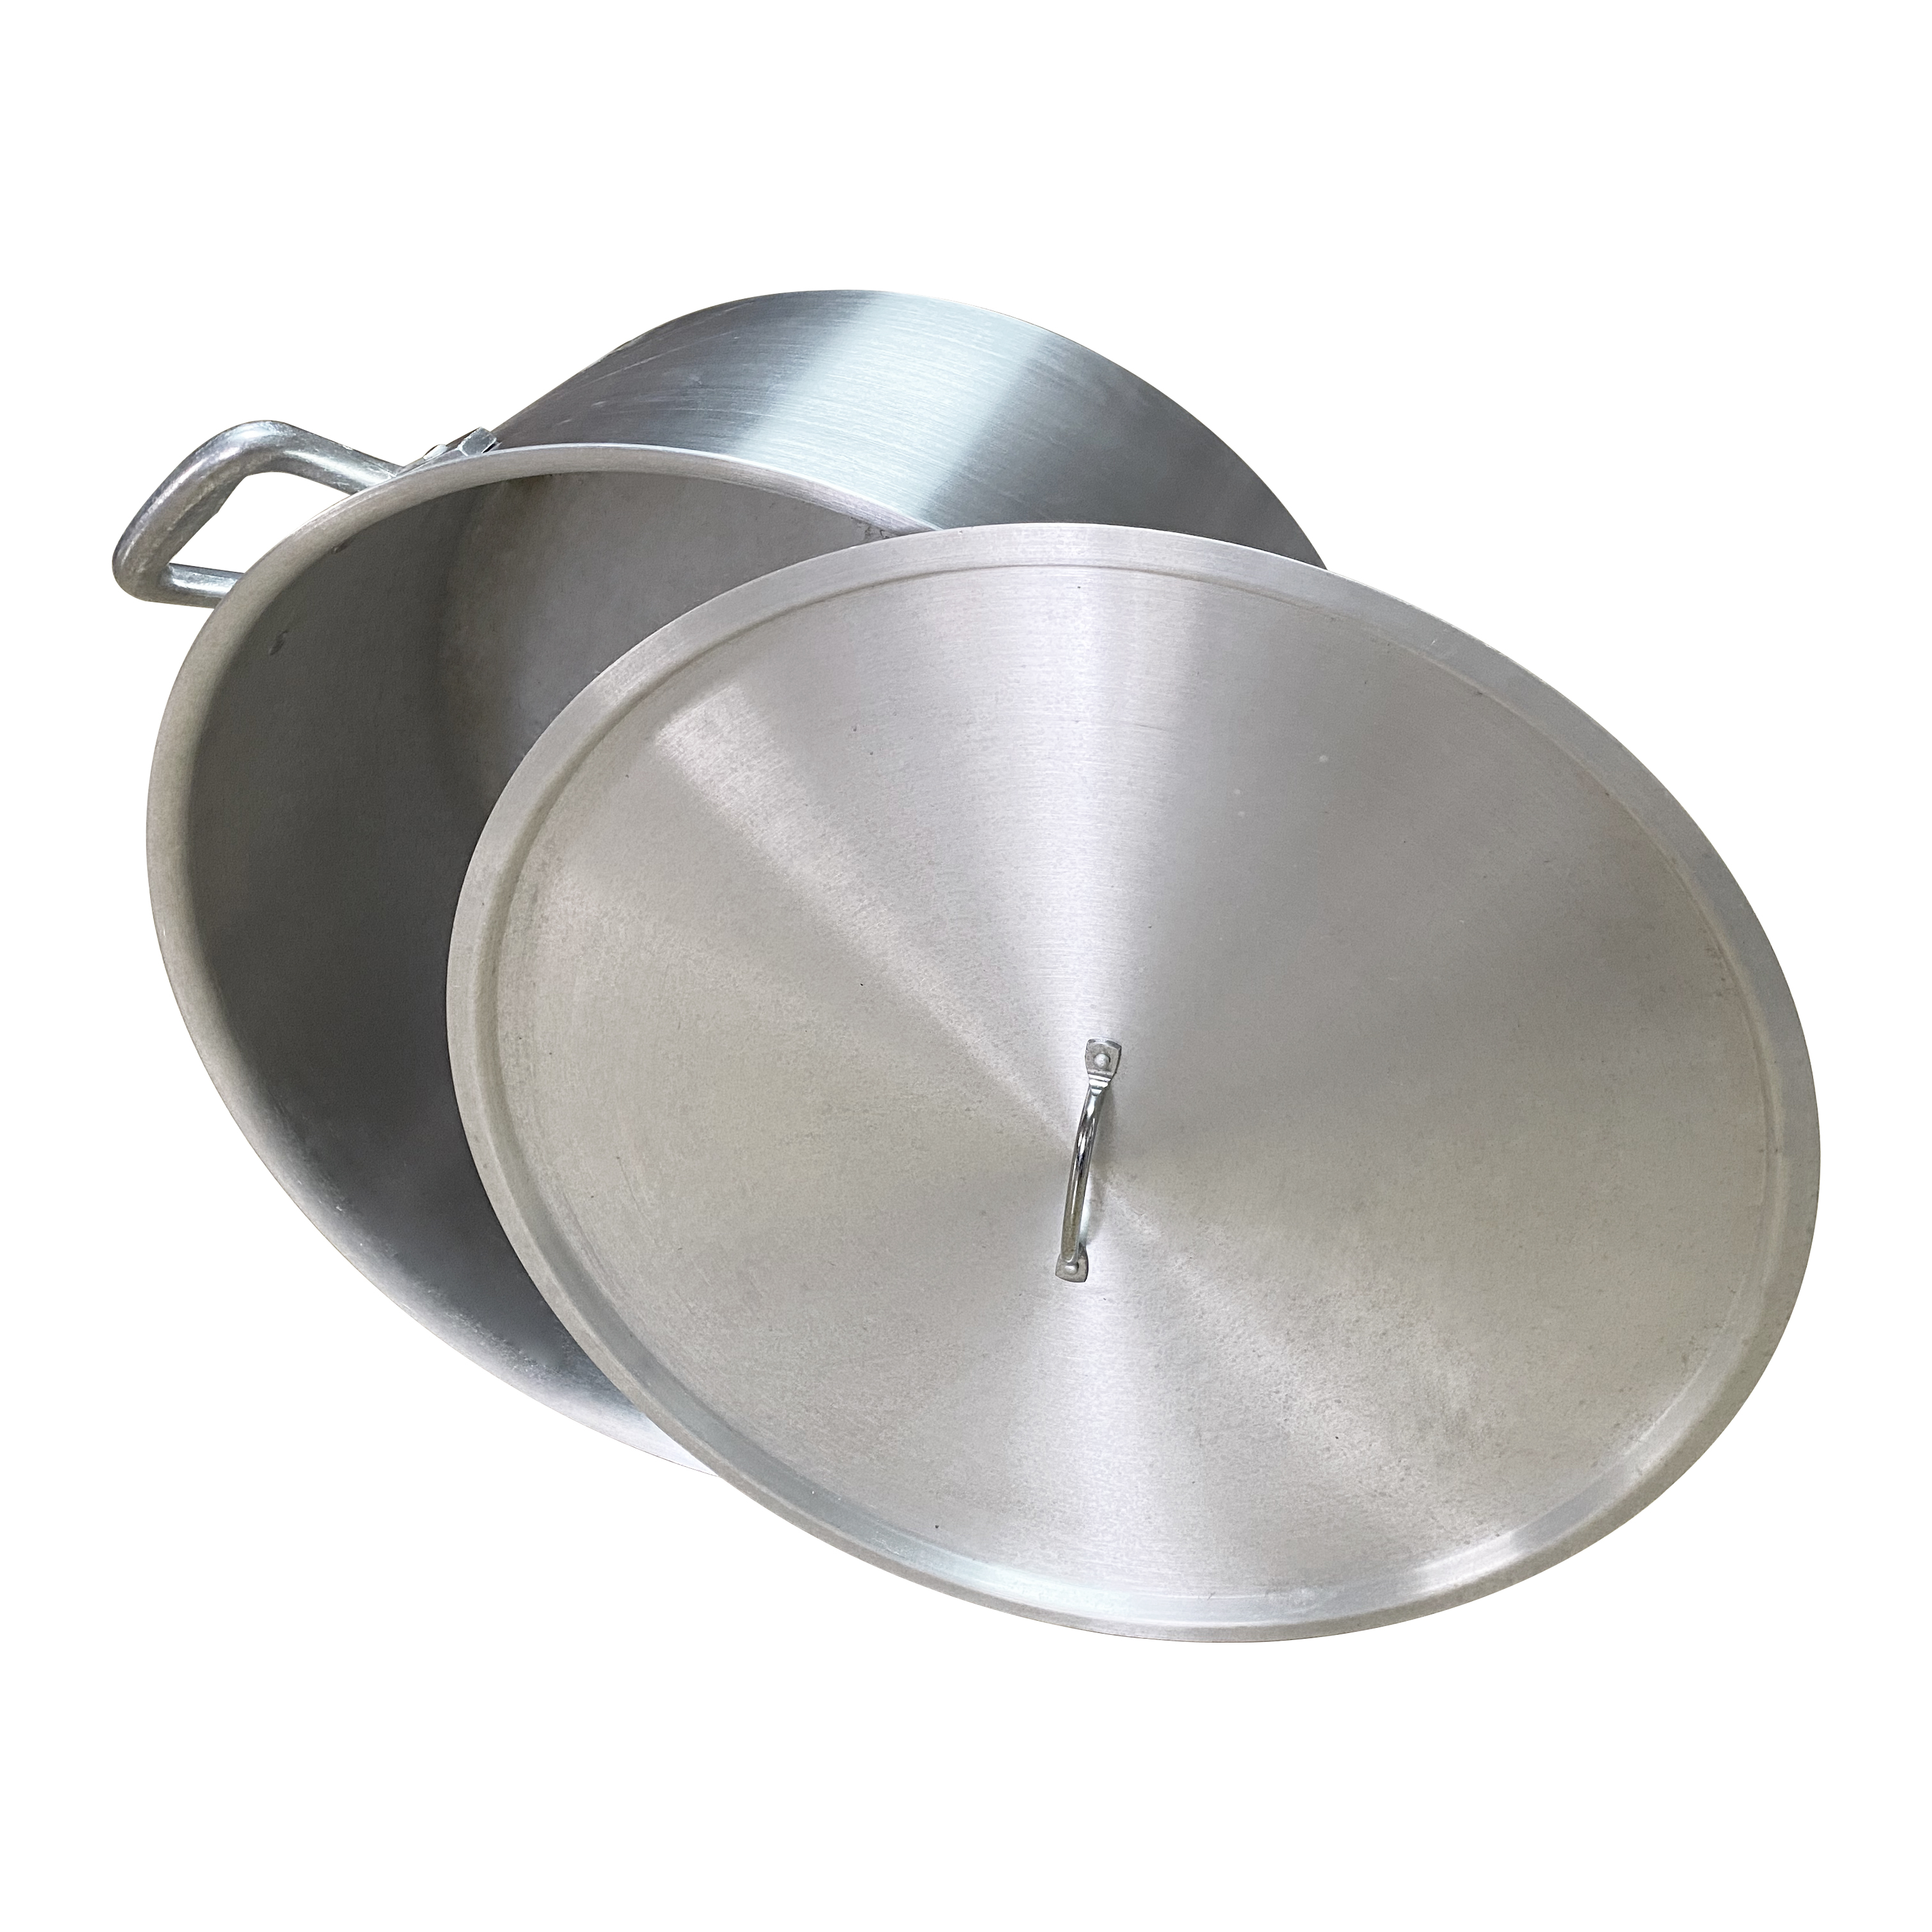 High Temperature Resistant Stainless Steel Cooking Pot Dining Soup Set Equipment